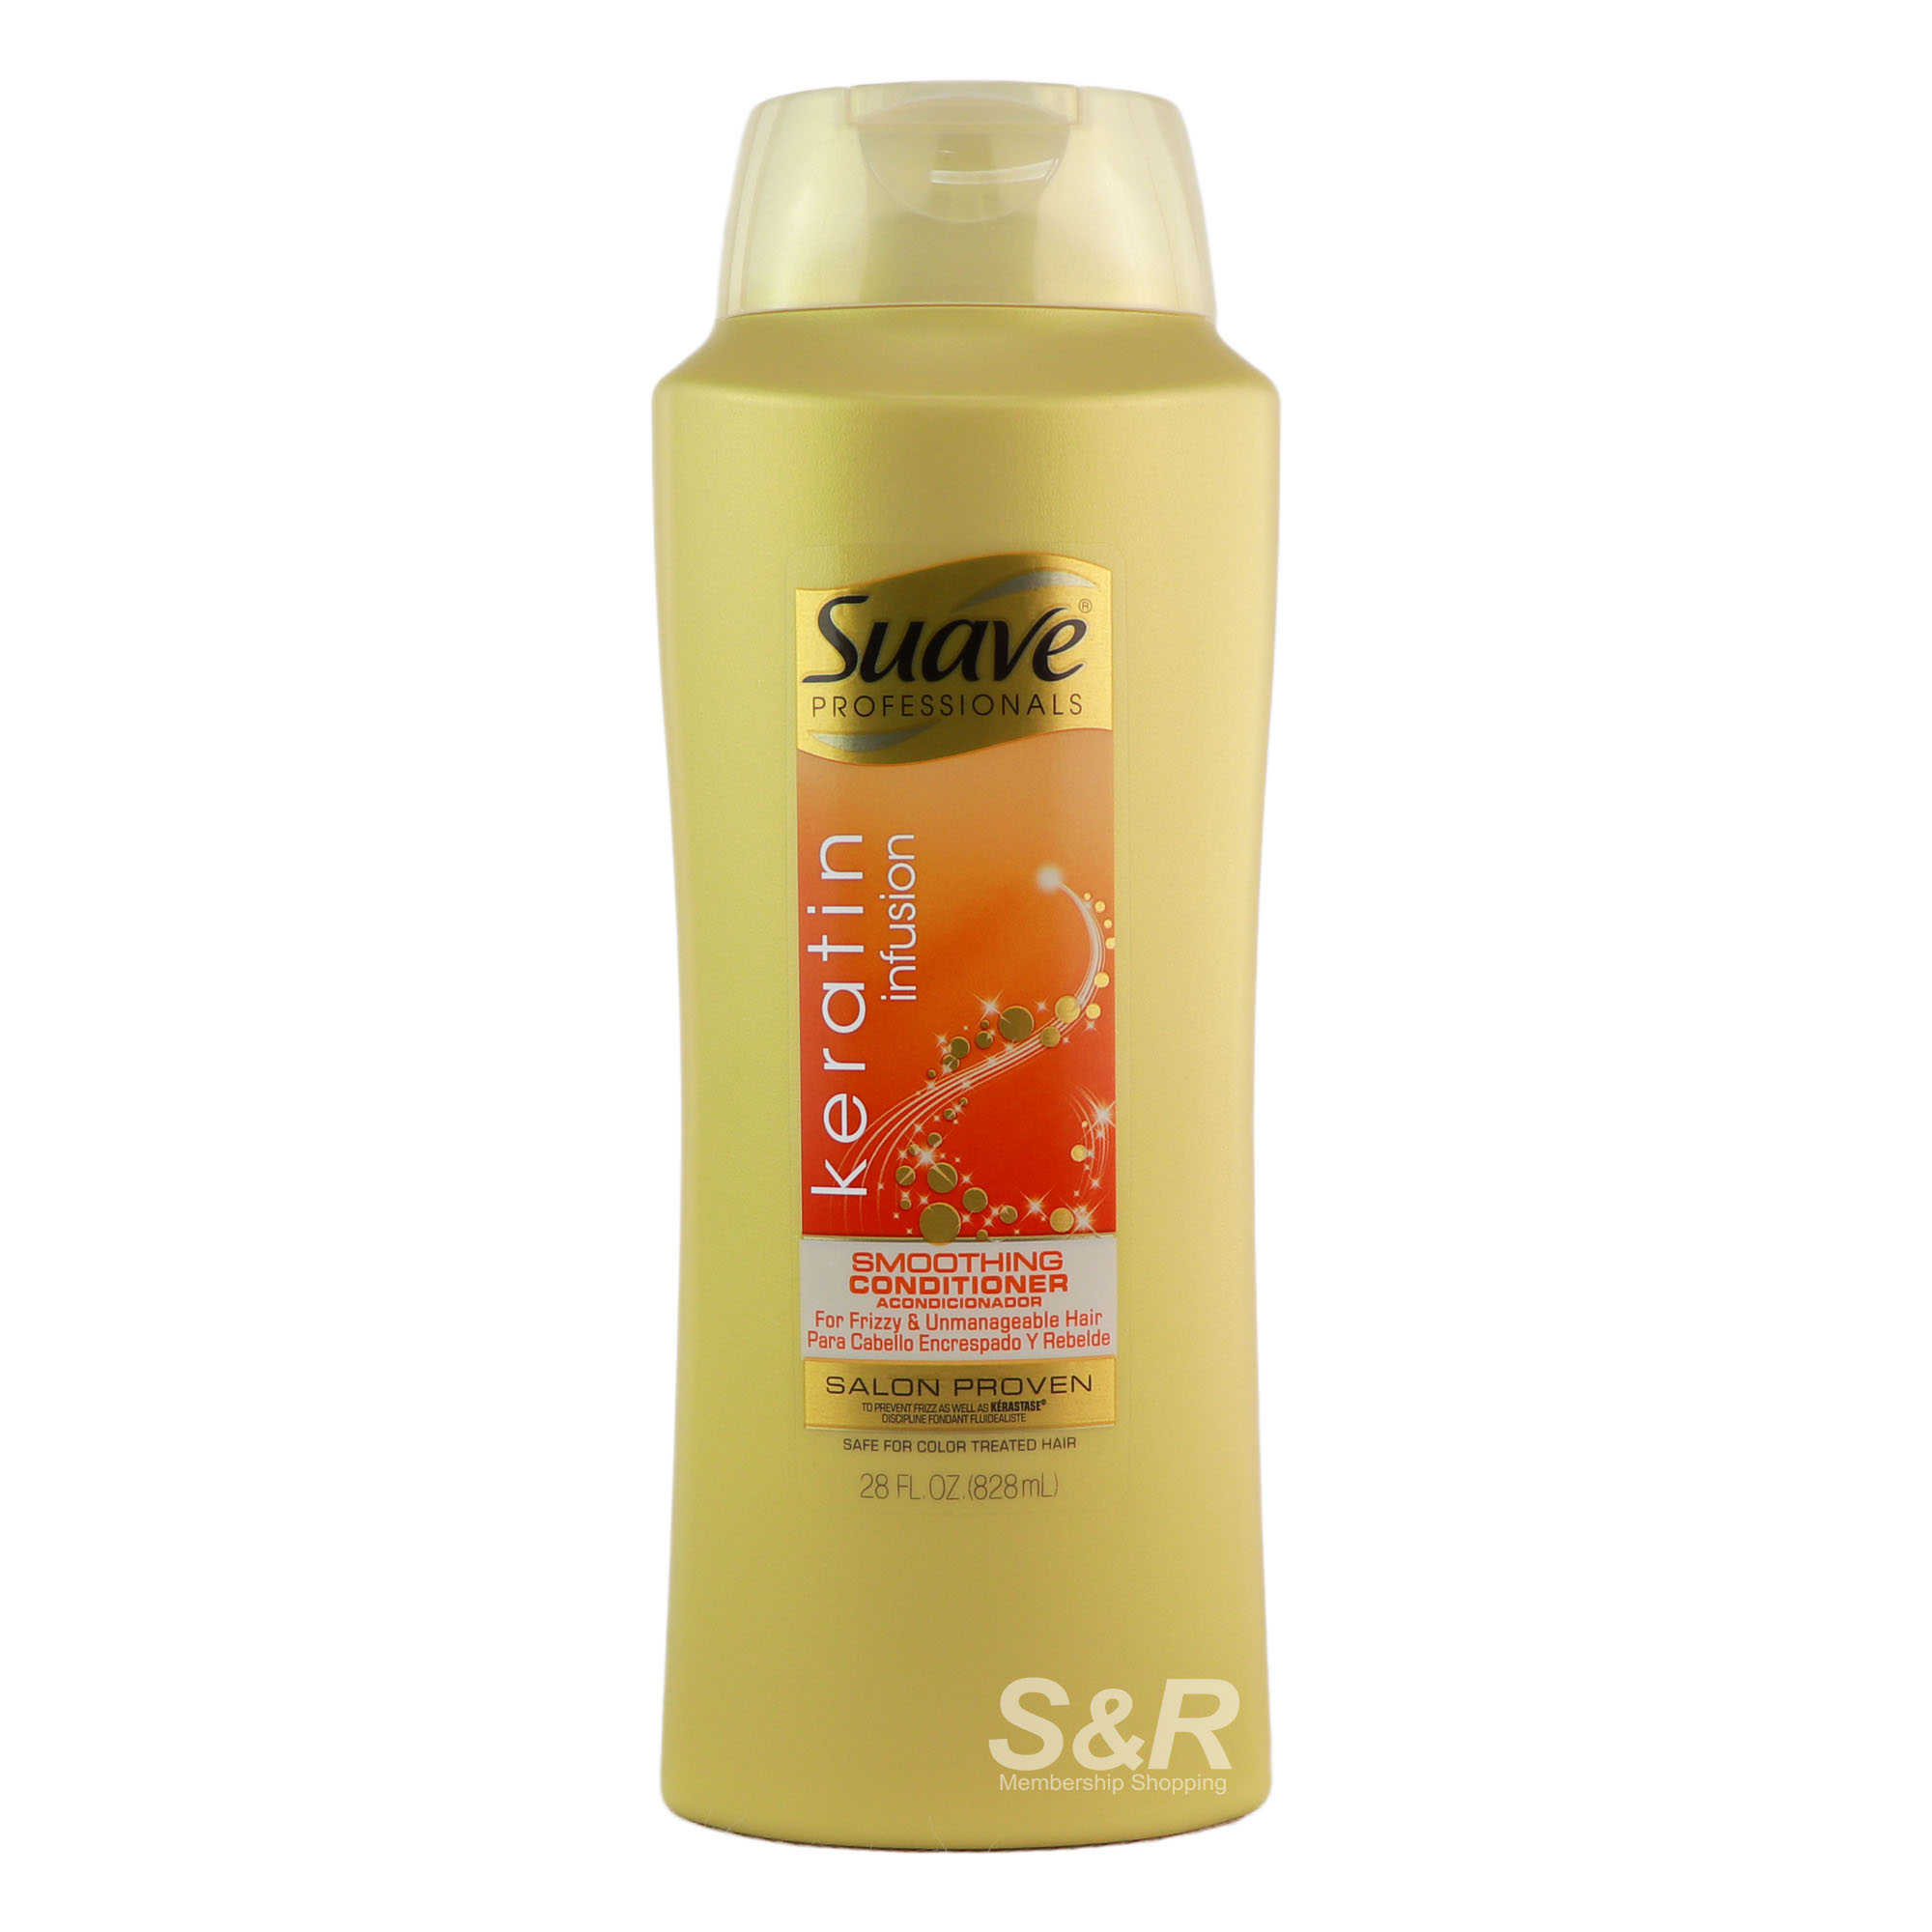 Suave Professionals Keratin Infusion Smoothing Conditioner 828mL